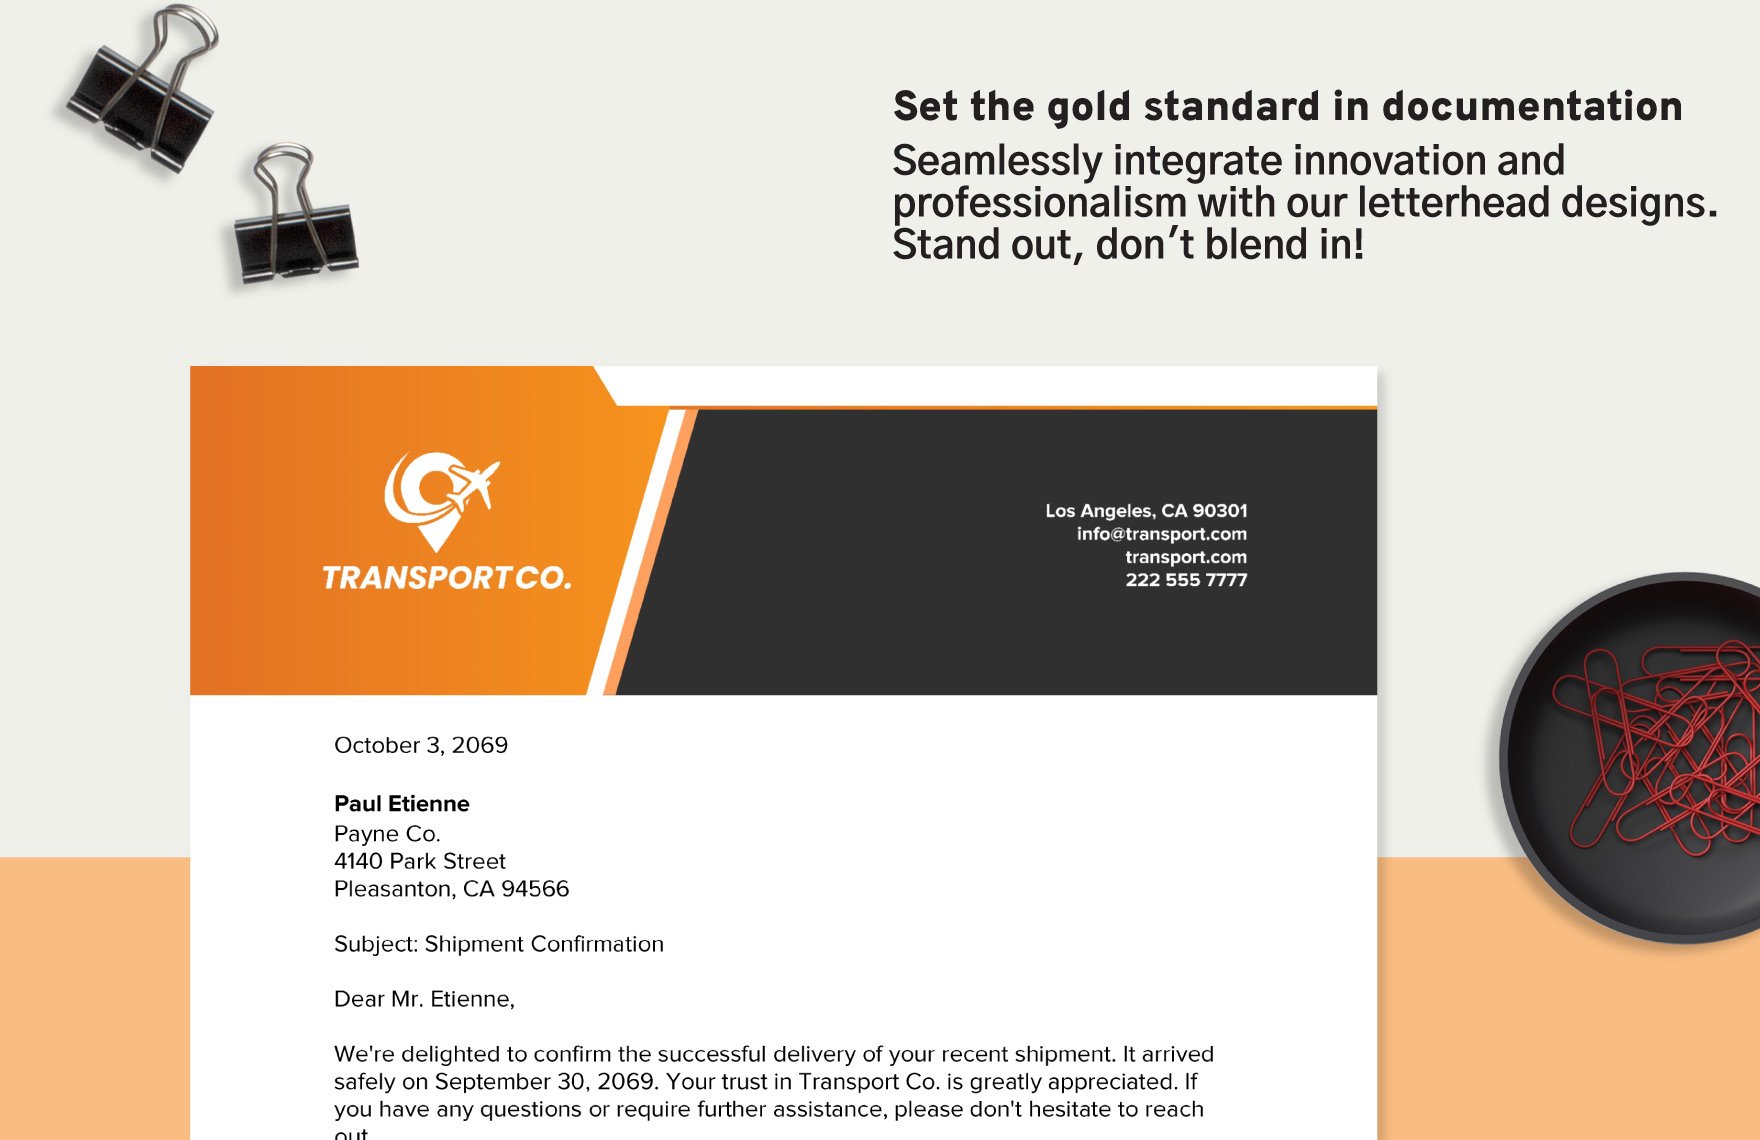 Transport and Logistics Air Cargo Services Letterhead Template